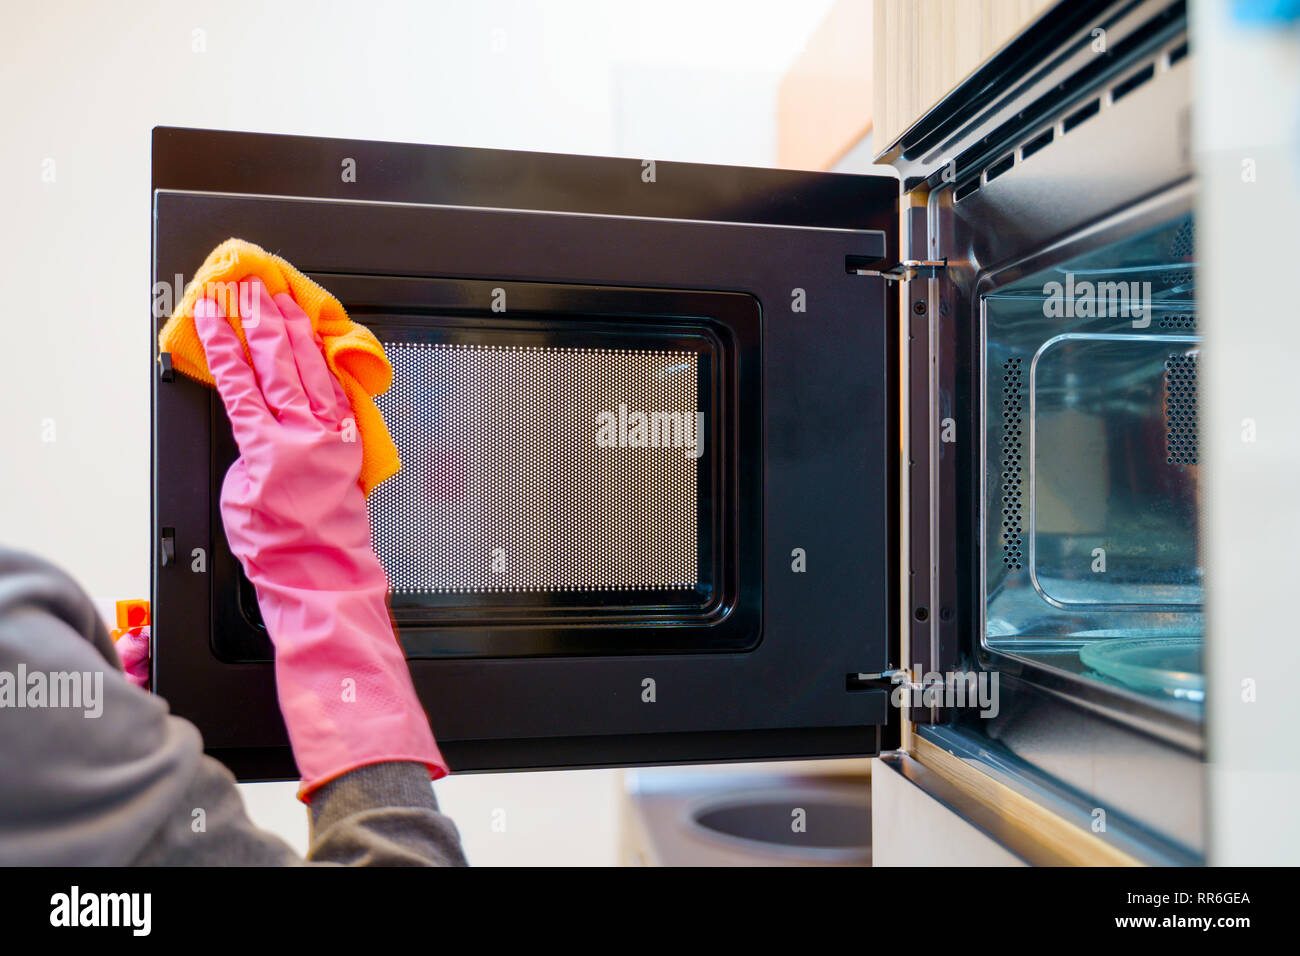 Image of woman hands in rubber gloves washing microwave. Stock Photo